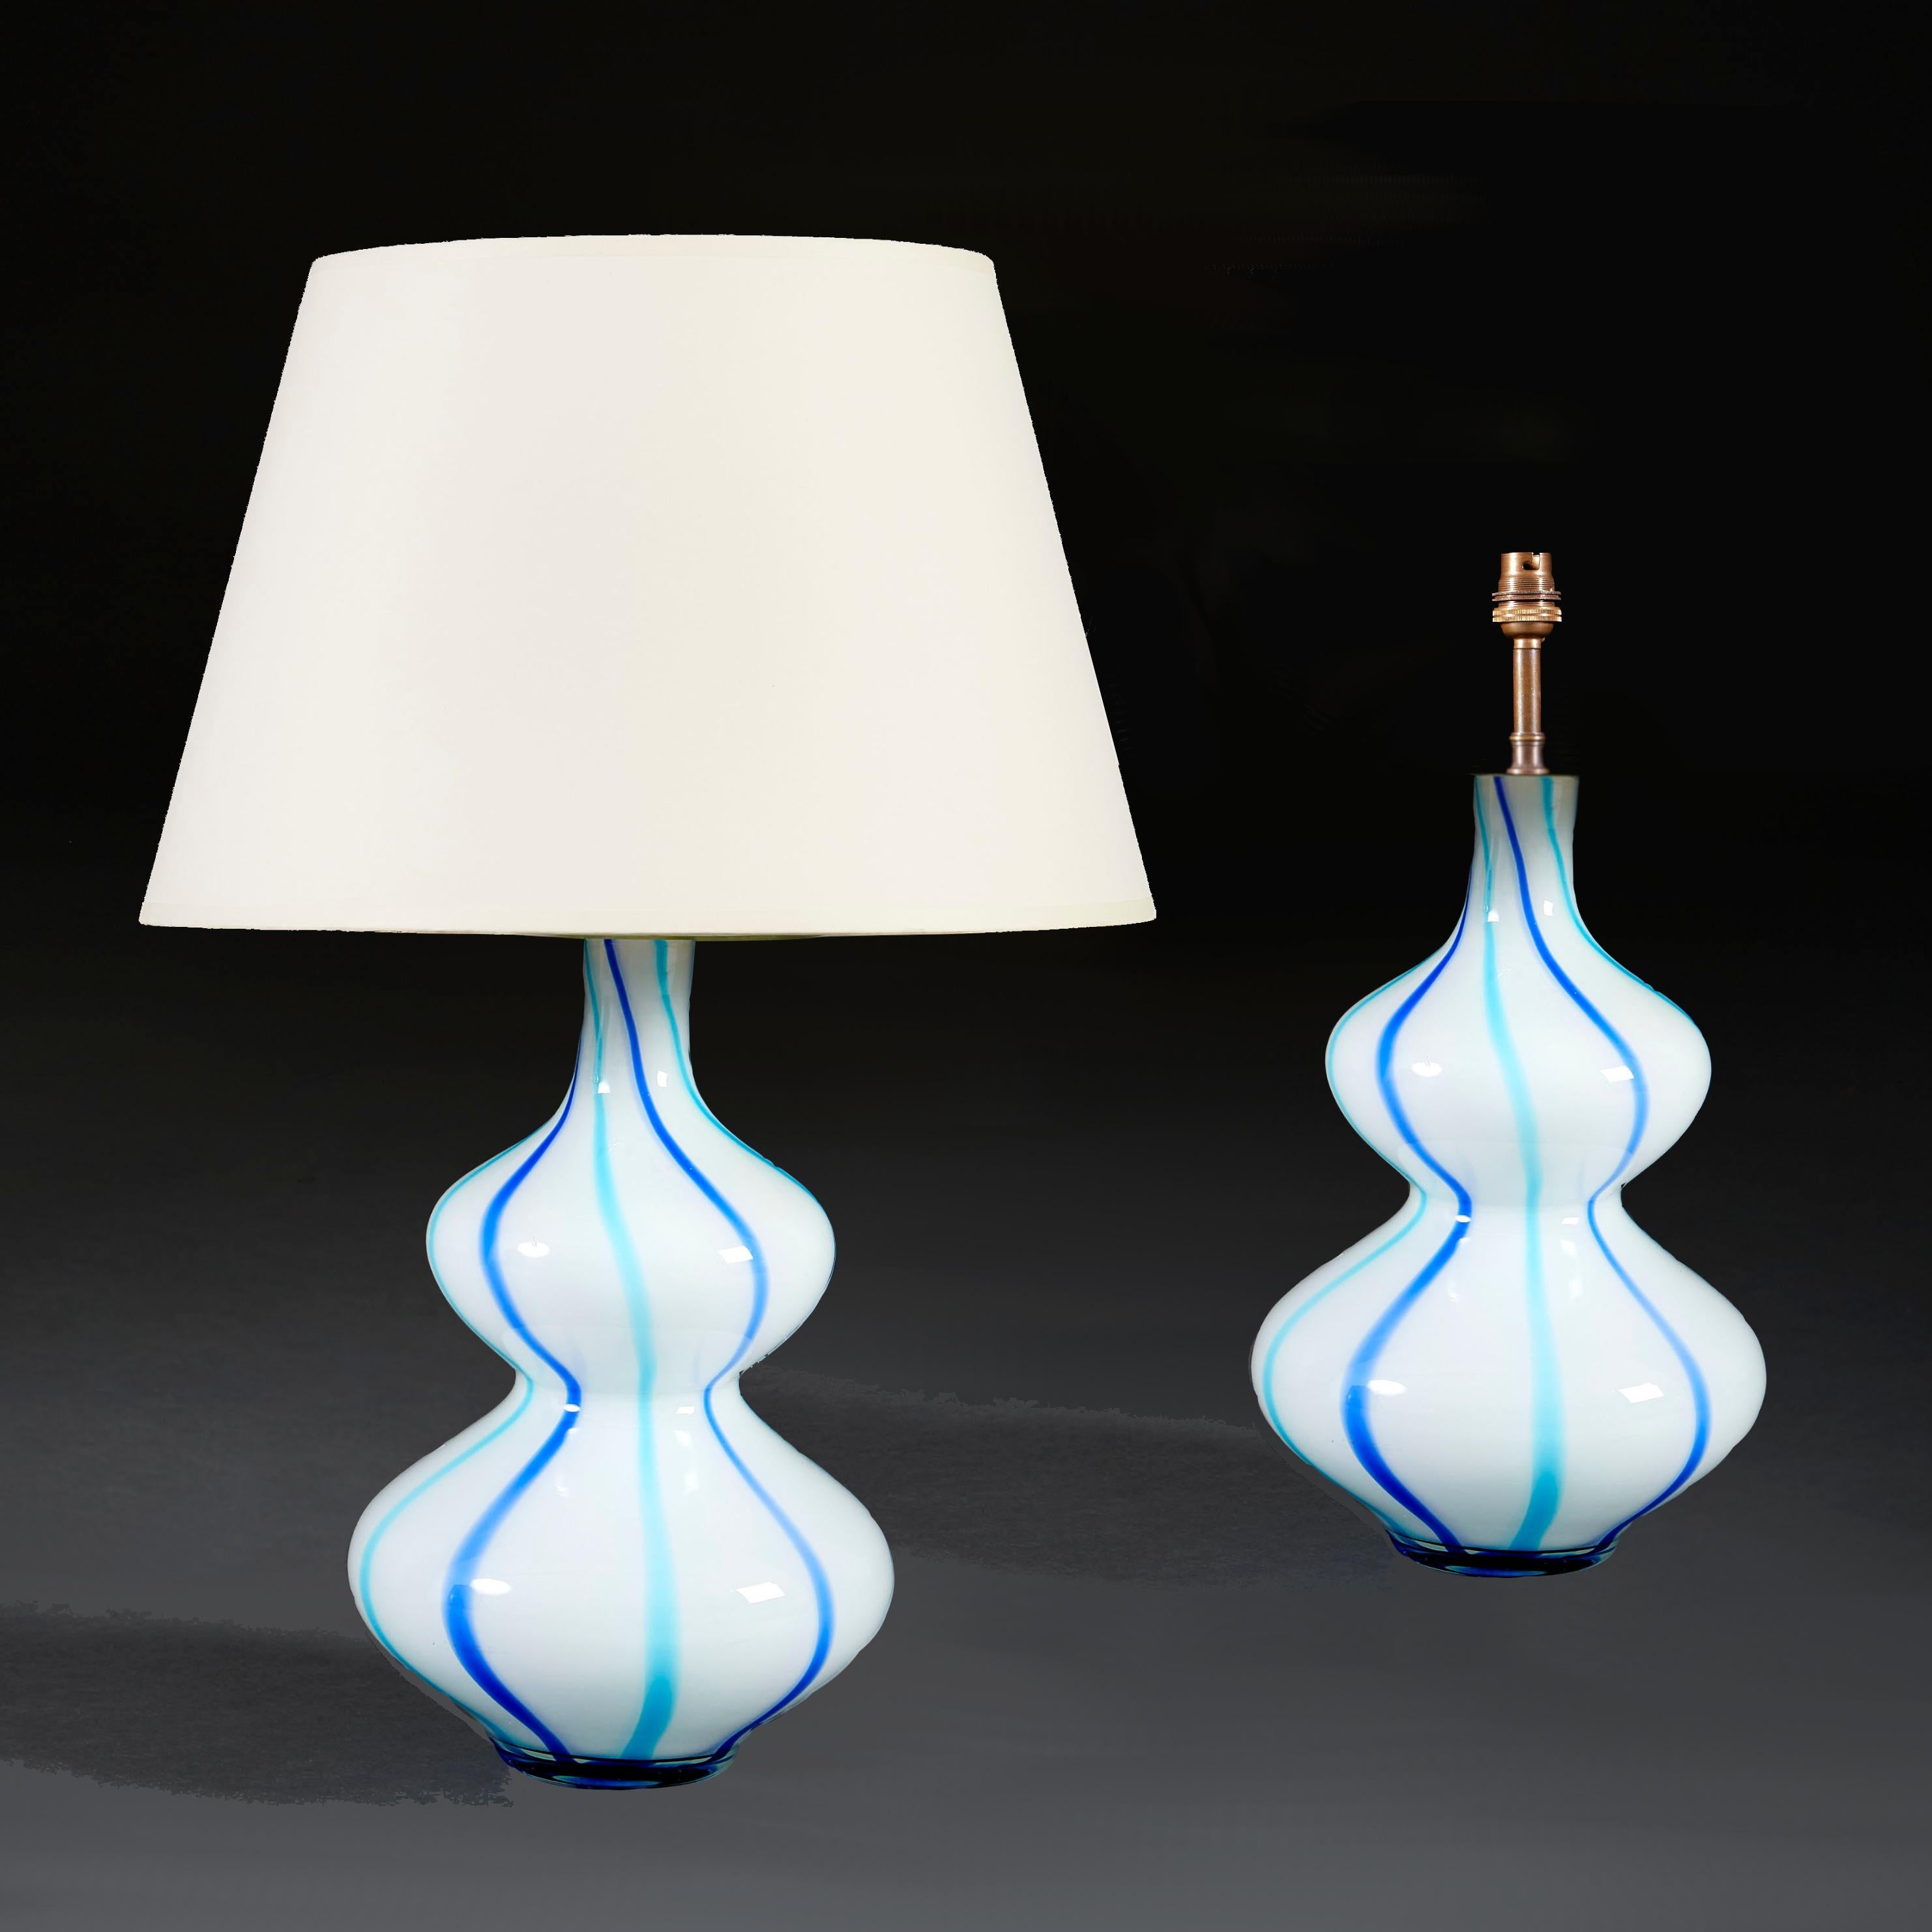 A Pair of Blue and White Stripe Double Gourd Murano Glass Vases as Table Lamps For Sale 1